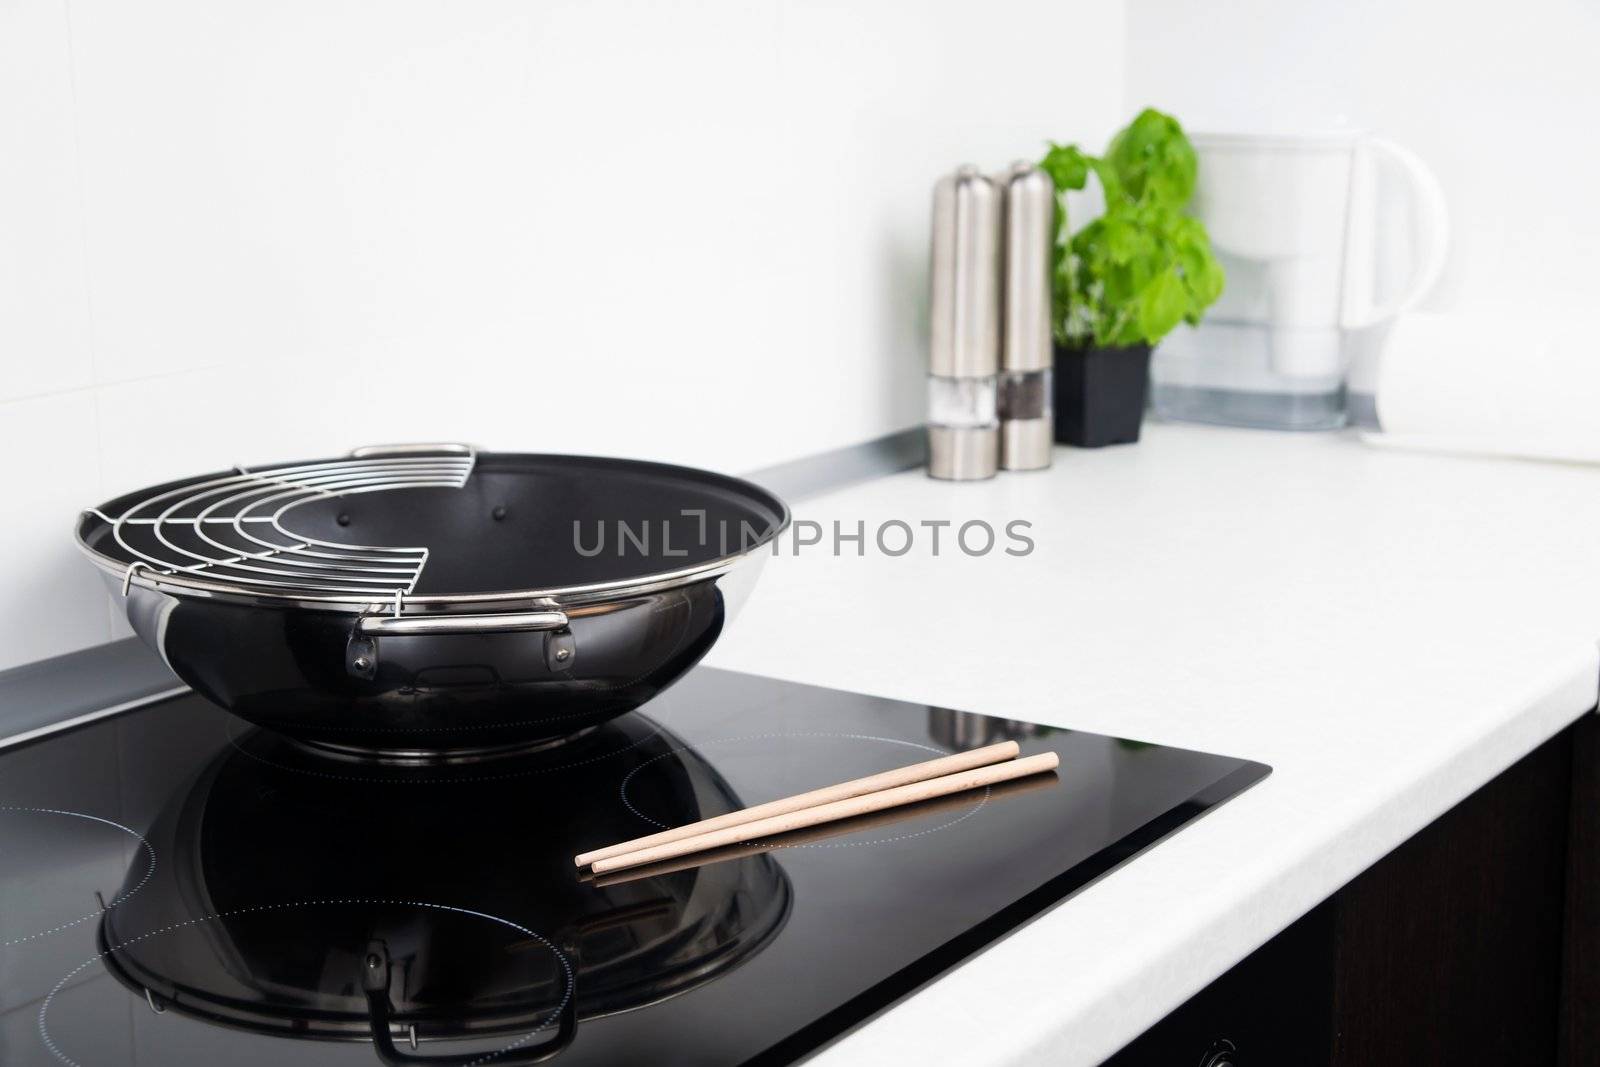 Frying pan in modern kitchen with induction stove by simpson33